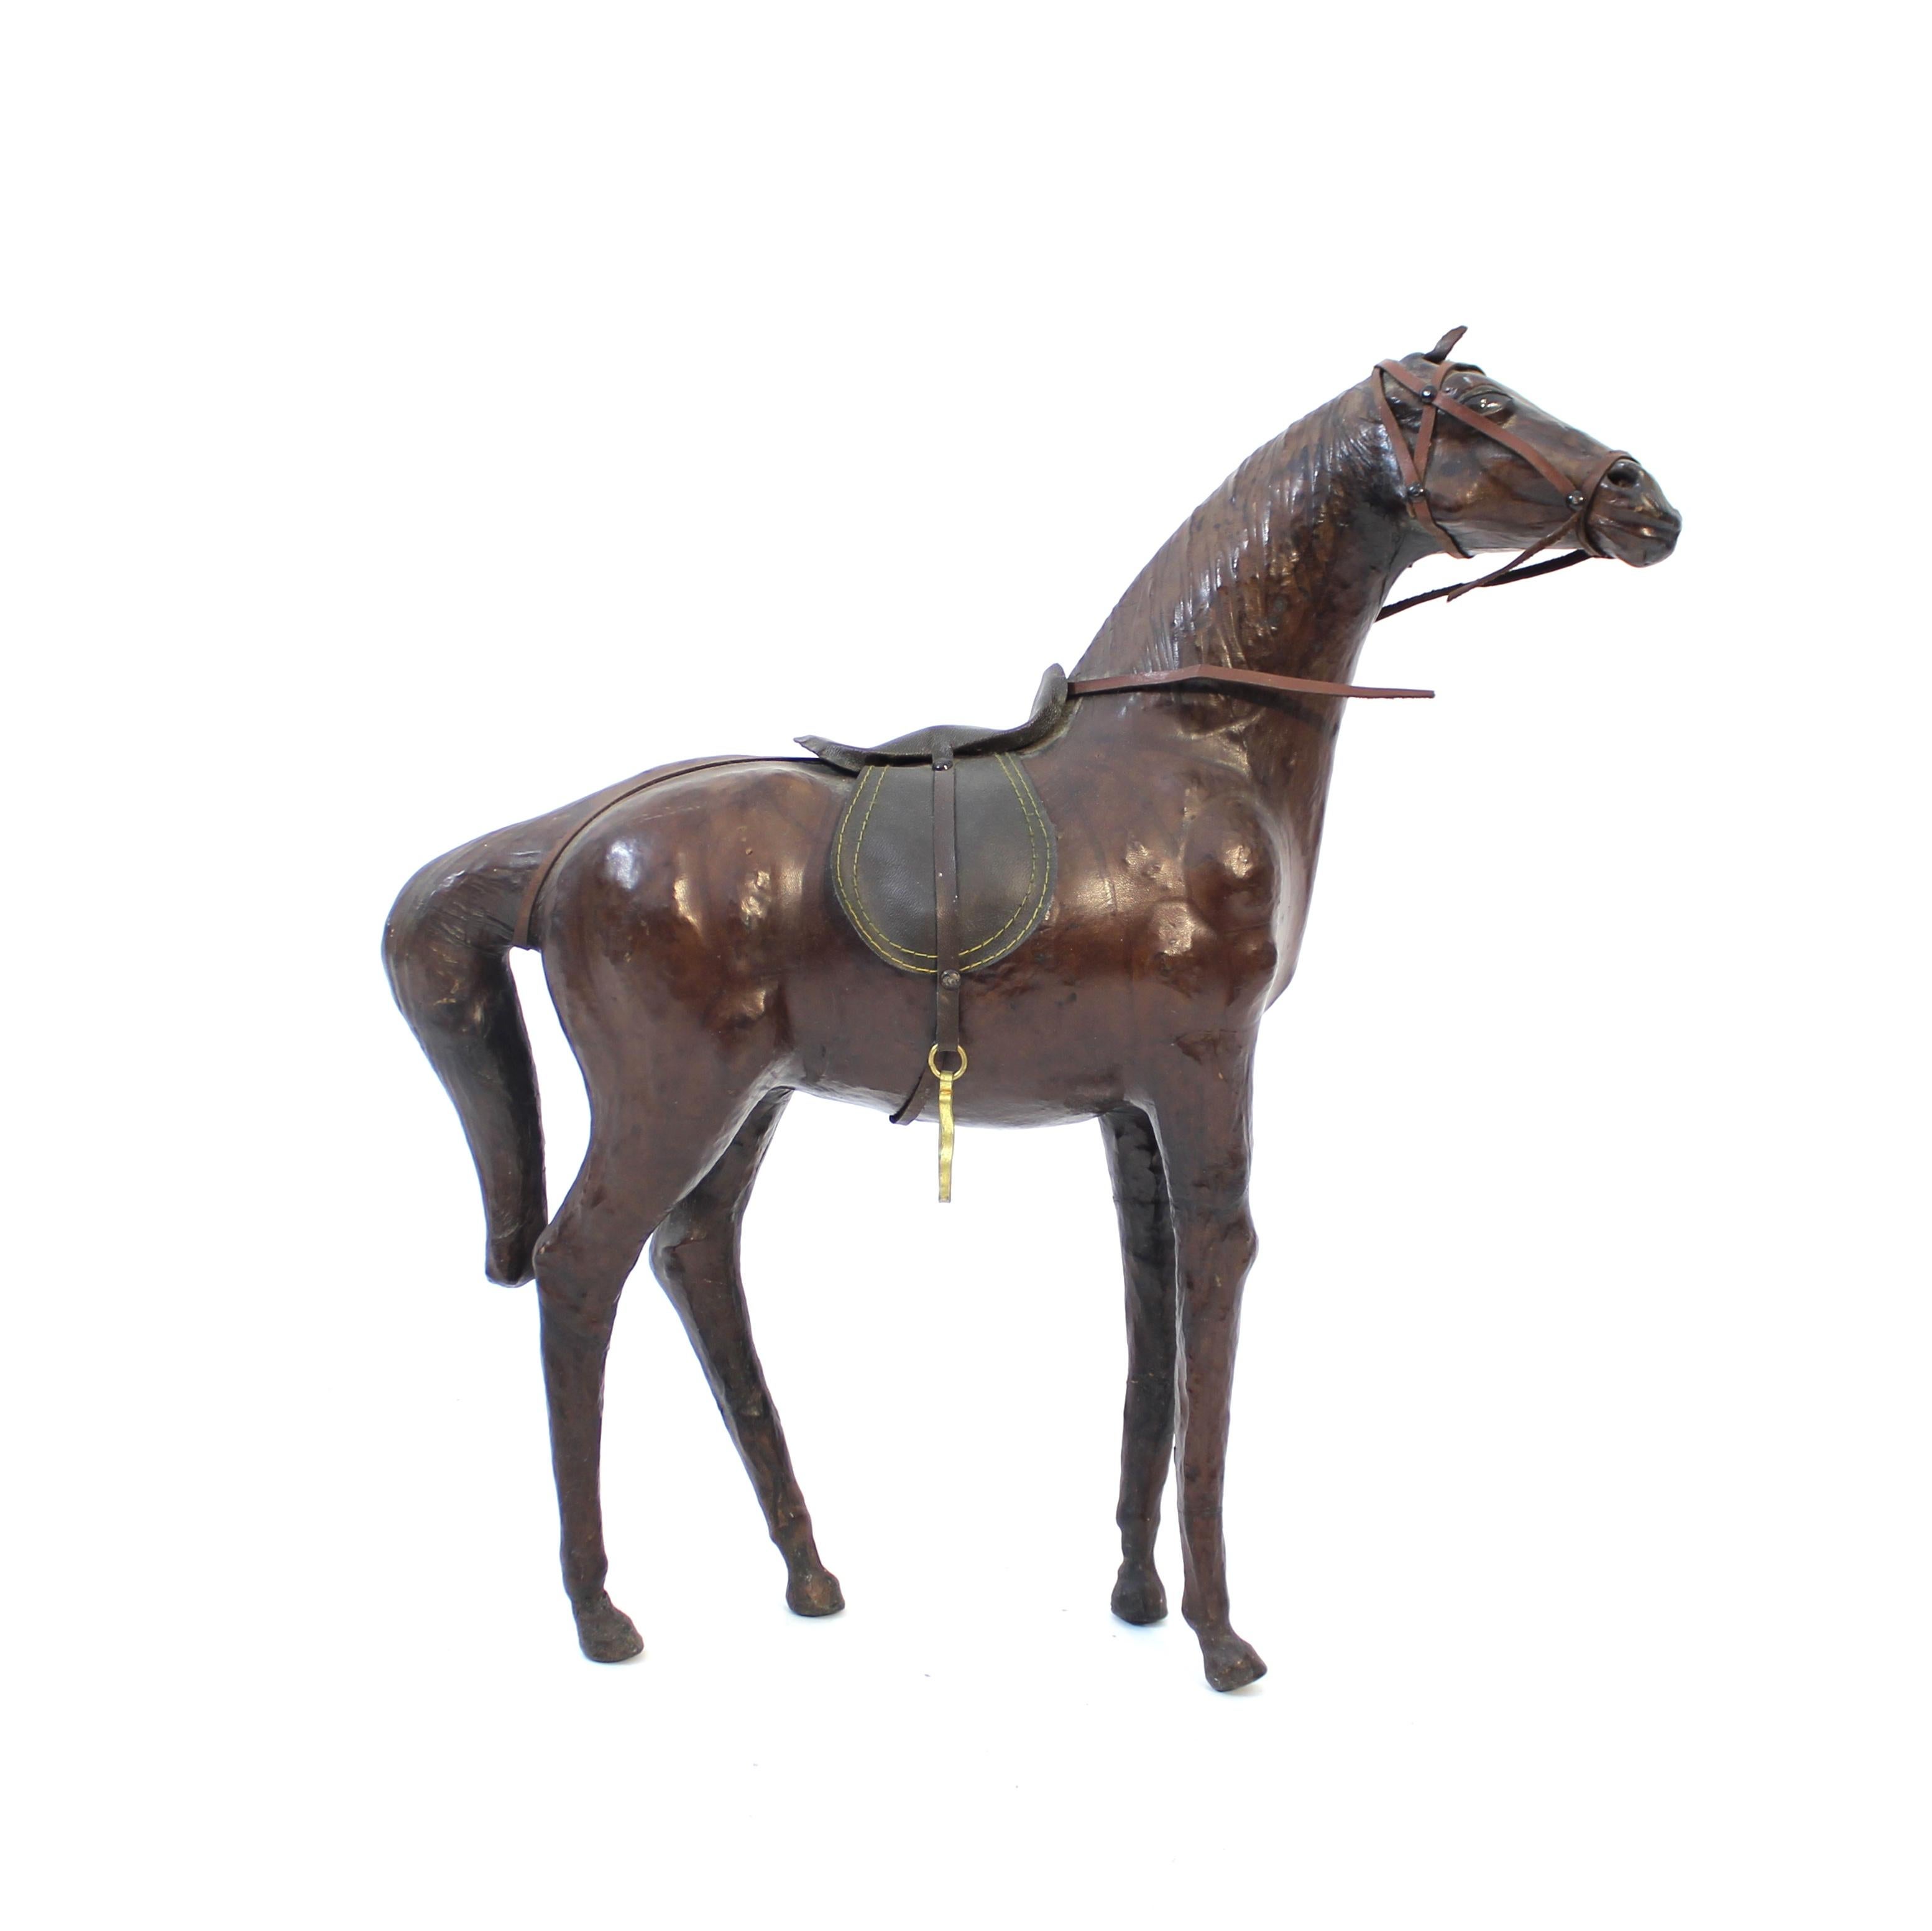 Horse sculpture / model made of genuine leather from the 1960s or 1970s. Well made with good proportions and details. Very decorative and would be a fun and cool piece for any kind of interior from Scandinavian modern to eclectic. Good and honest